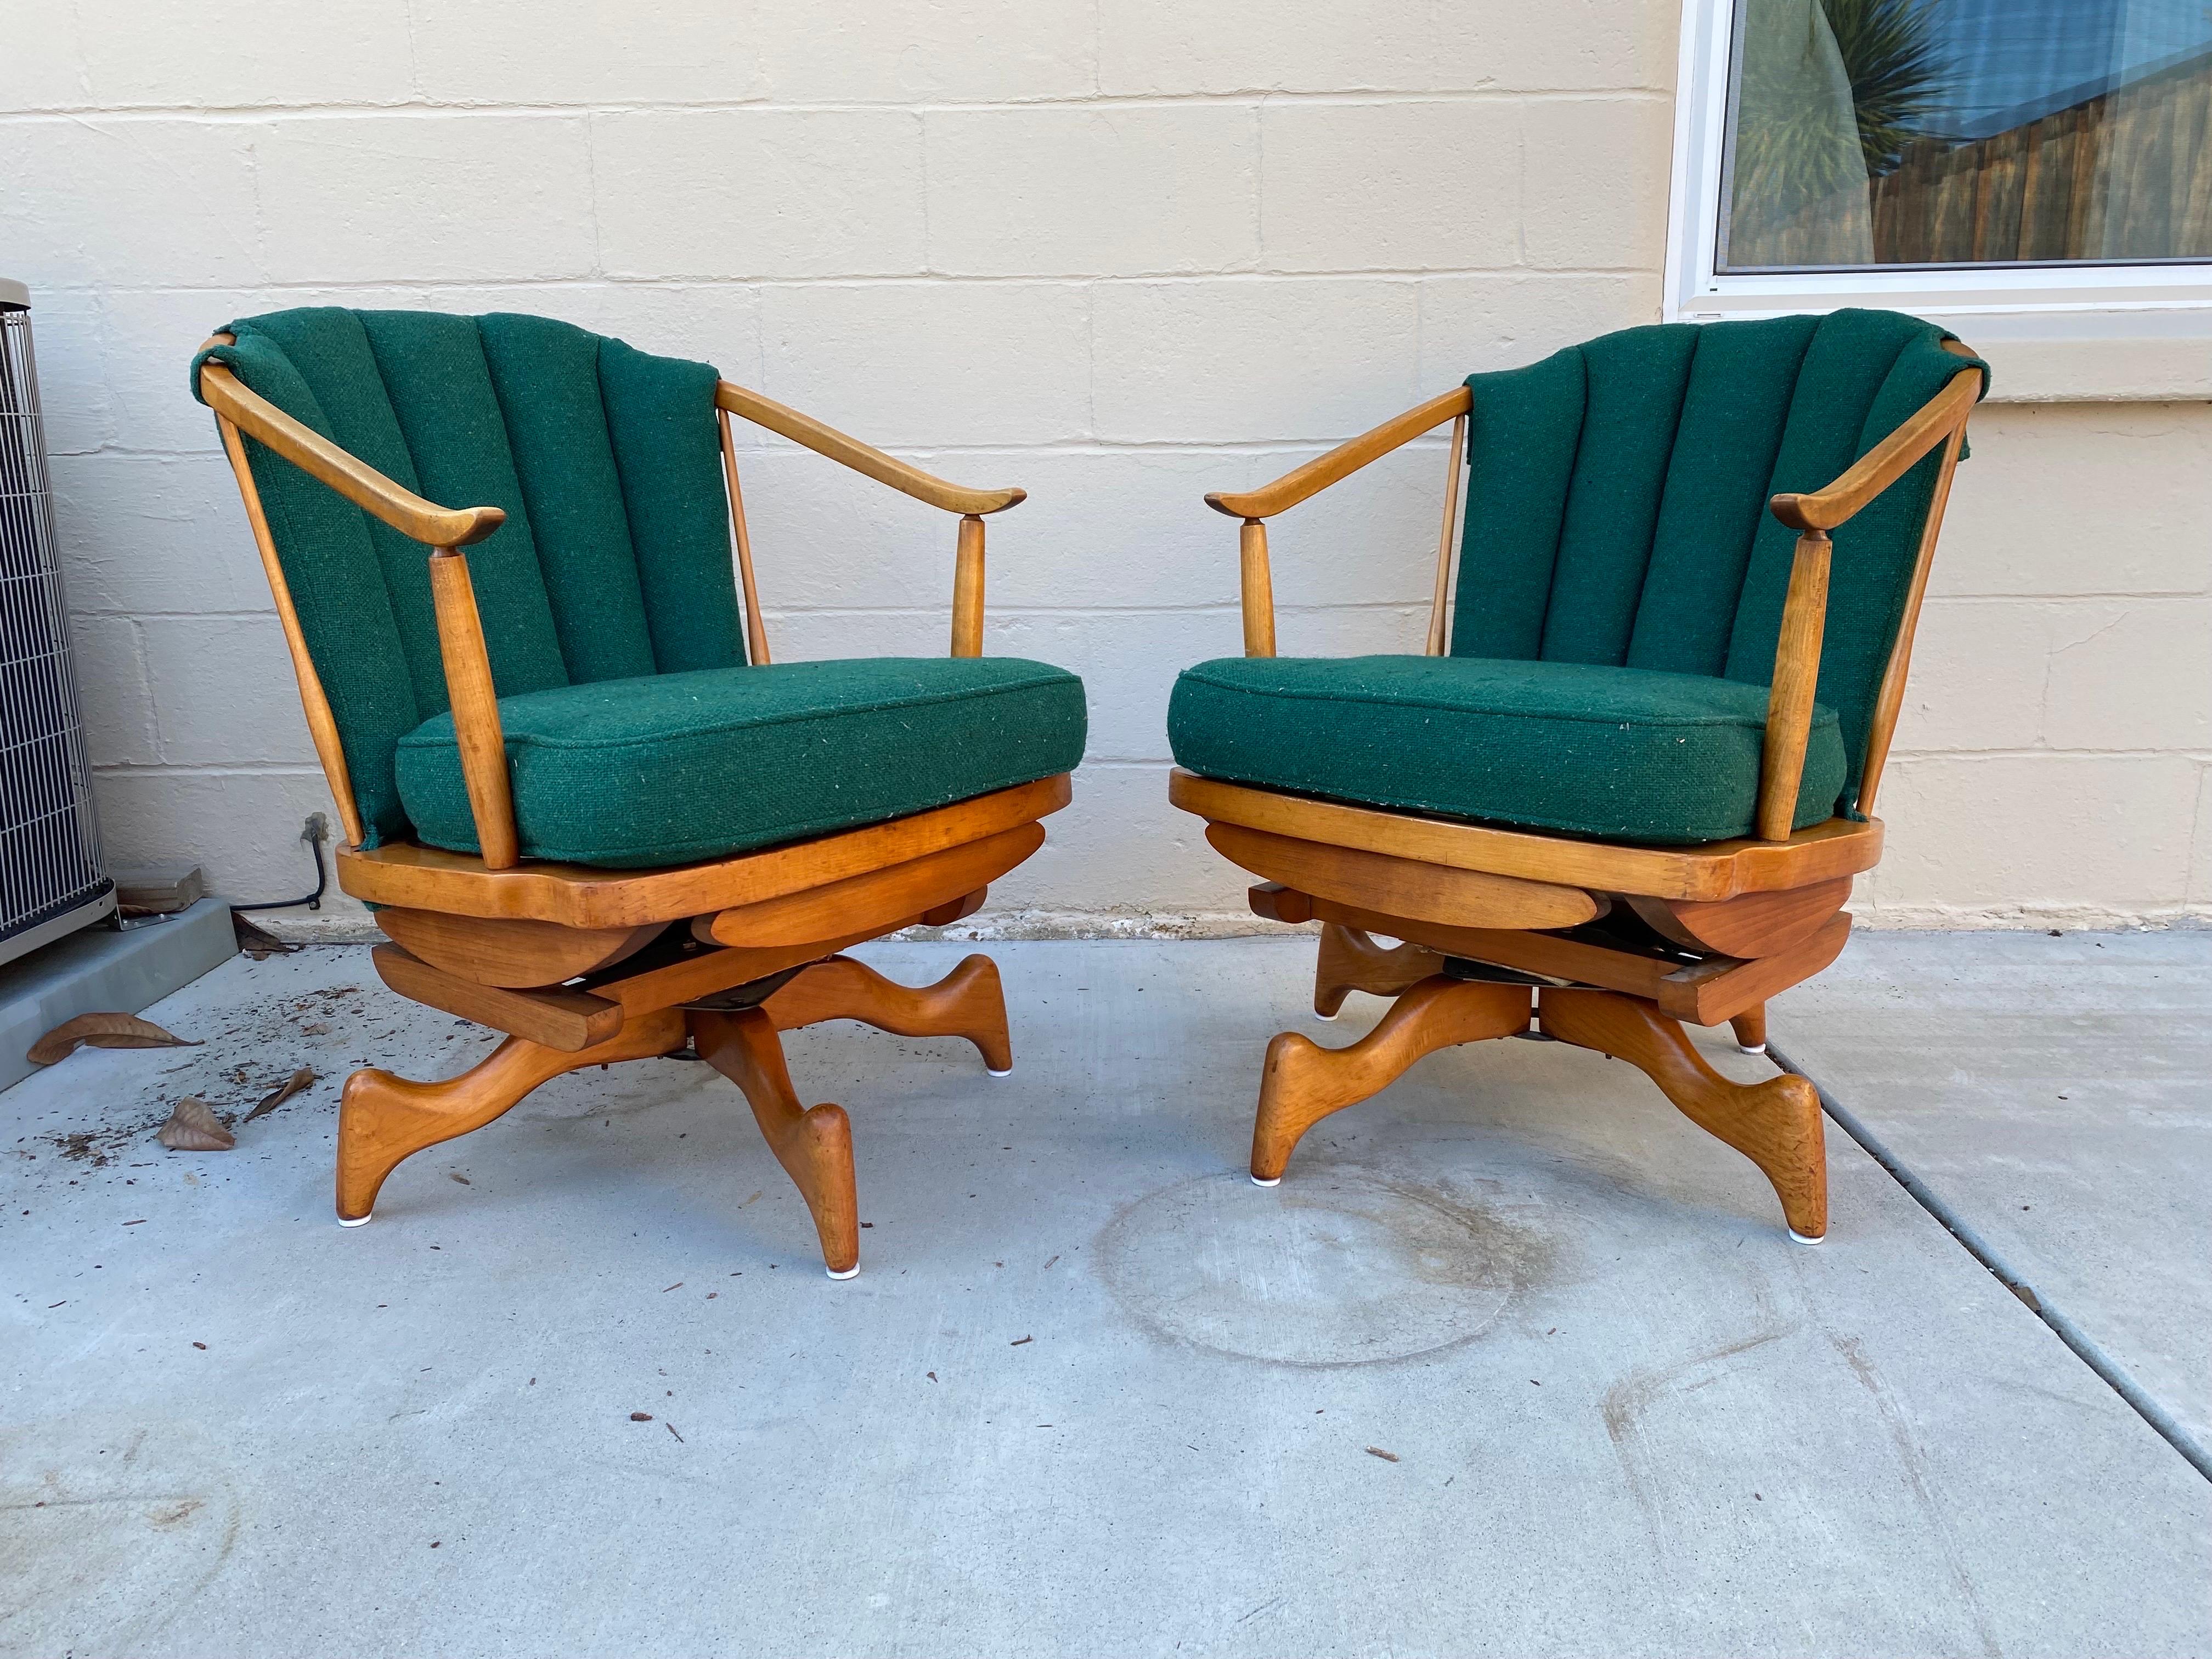 Cool set of 2 Mid-Century Modern platform spring rocking chairs with spindled barrel back. Produced in the 1950s, these rocking chairs in Birch (?) come with their original green upholstered cushions and are reminiscent of the great Mid-Century